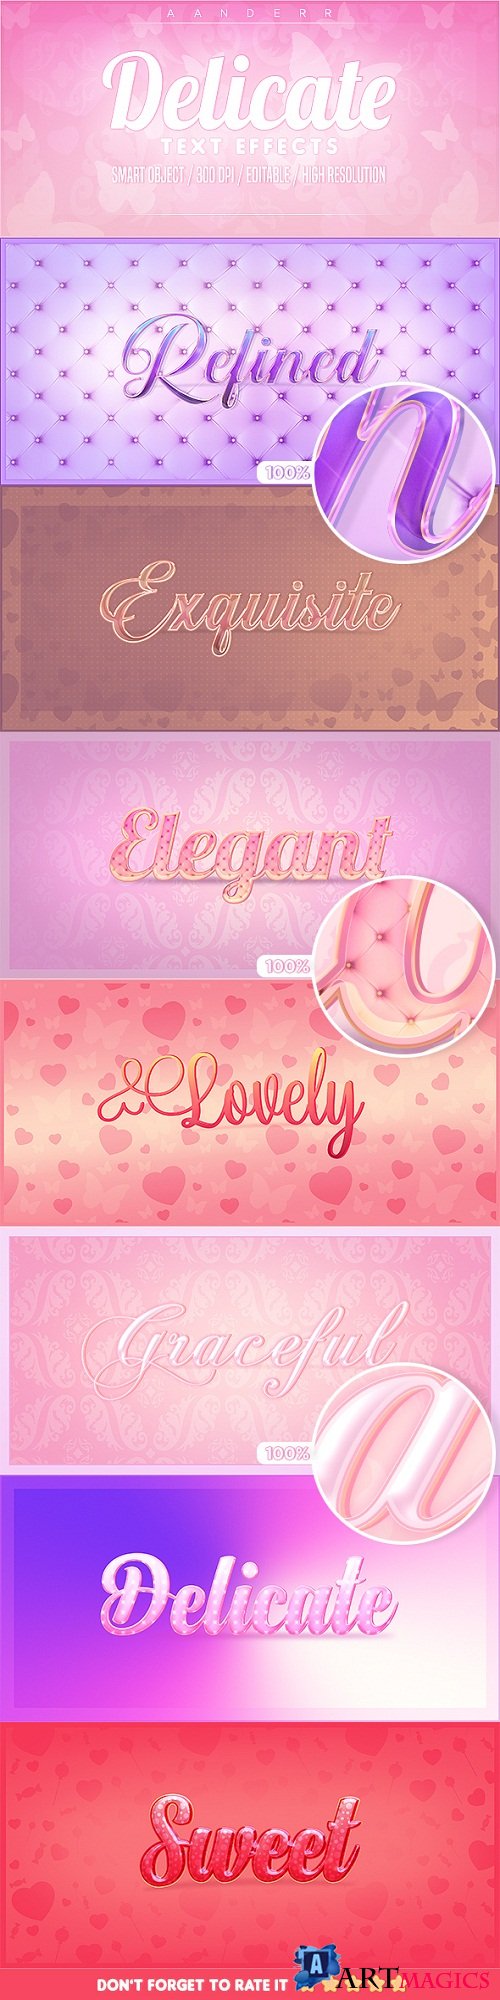 Delicate Photoshop Text Effects 22931110